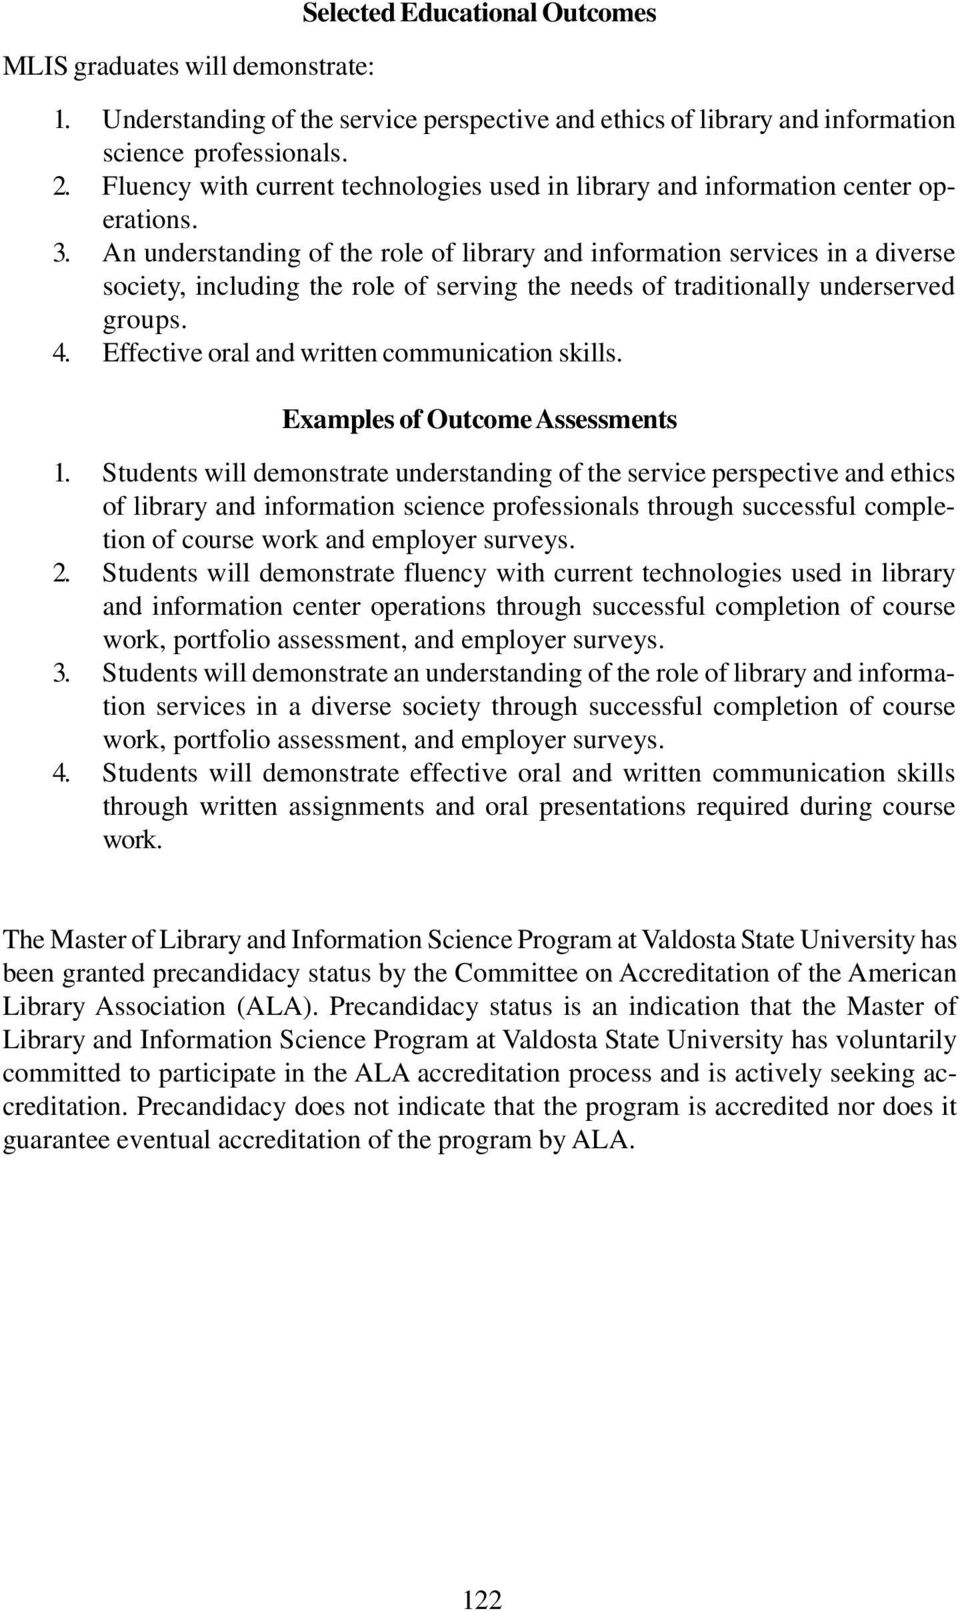 An understanding of the role of library and information services in a diverse society, including the role of serving the needs of traditionally underserved groups. 4.